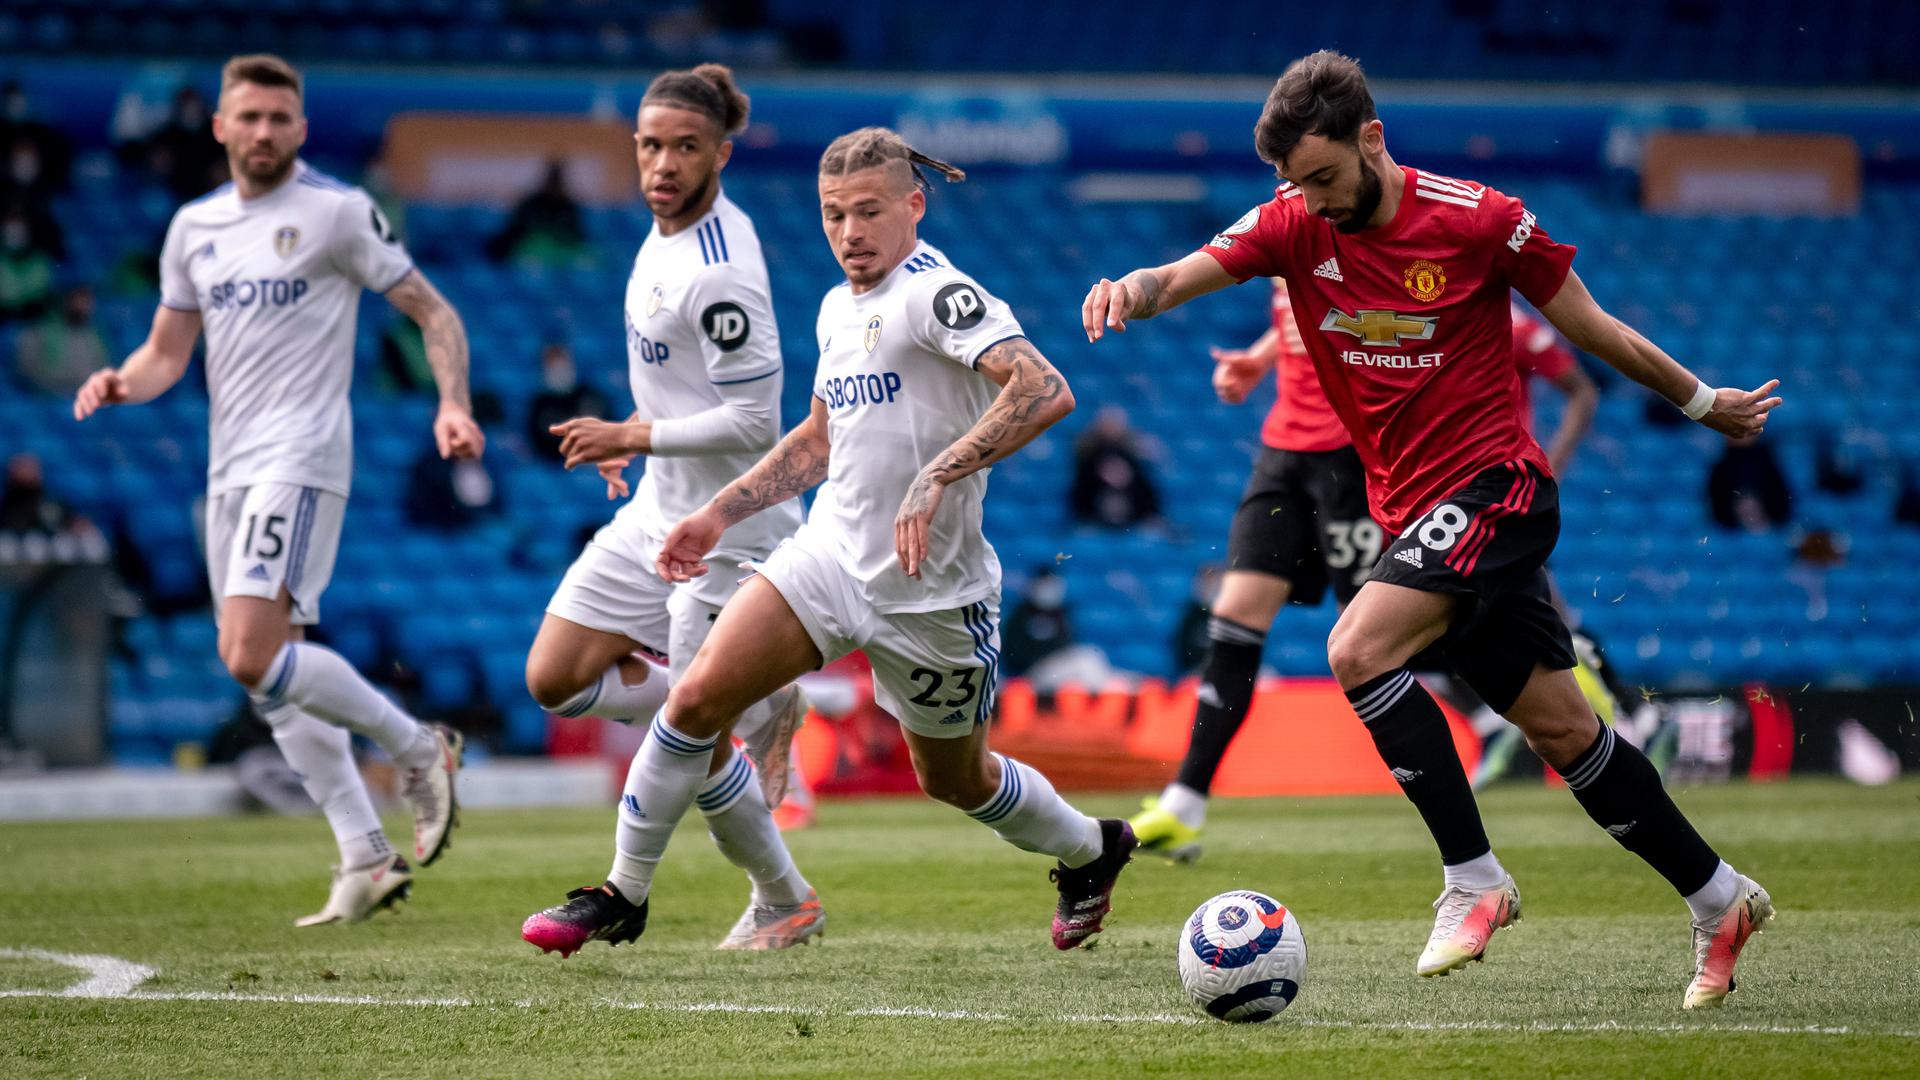 Crónica del partido: Leeds United 0 Manchester United 0 | Web oficial del Manchester United